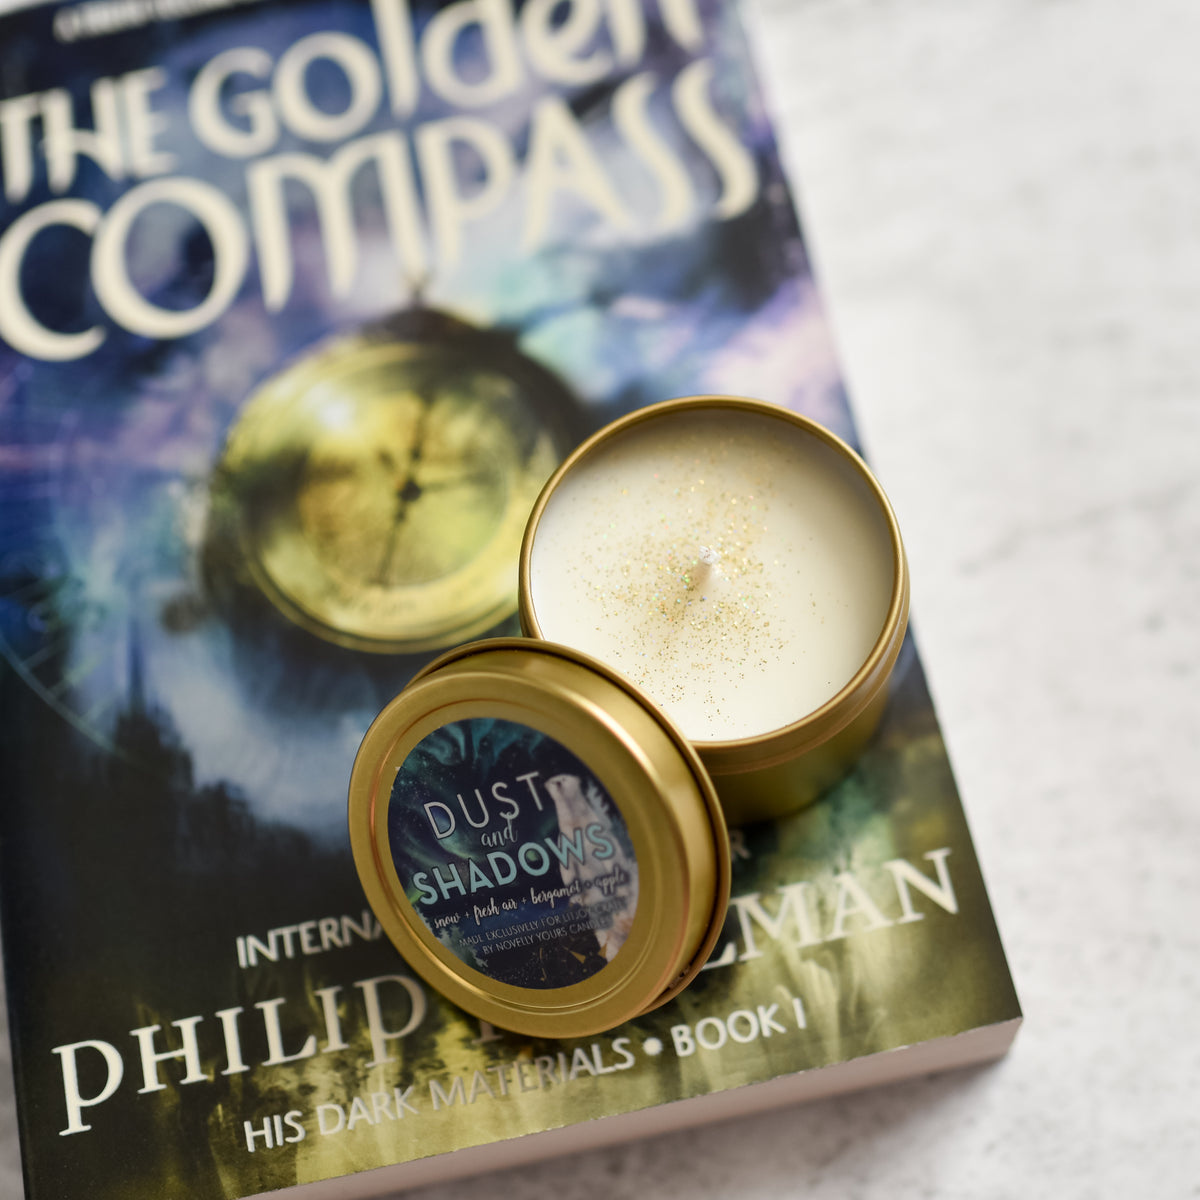 His Dark Materials Candle in a gold tin on top of The Golden Compass book by Philip Pullman